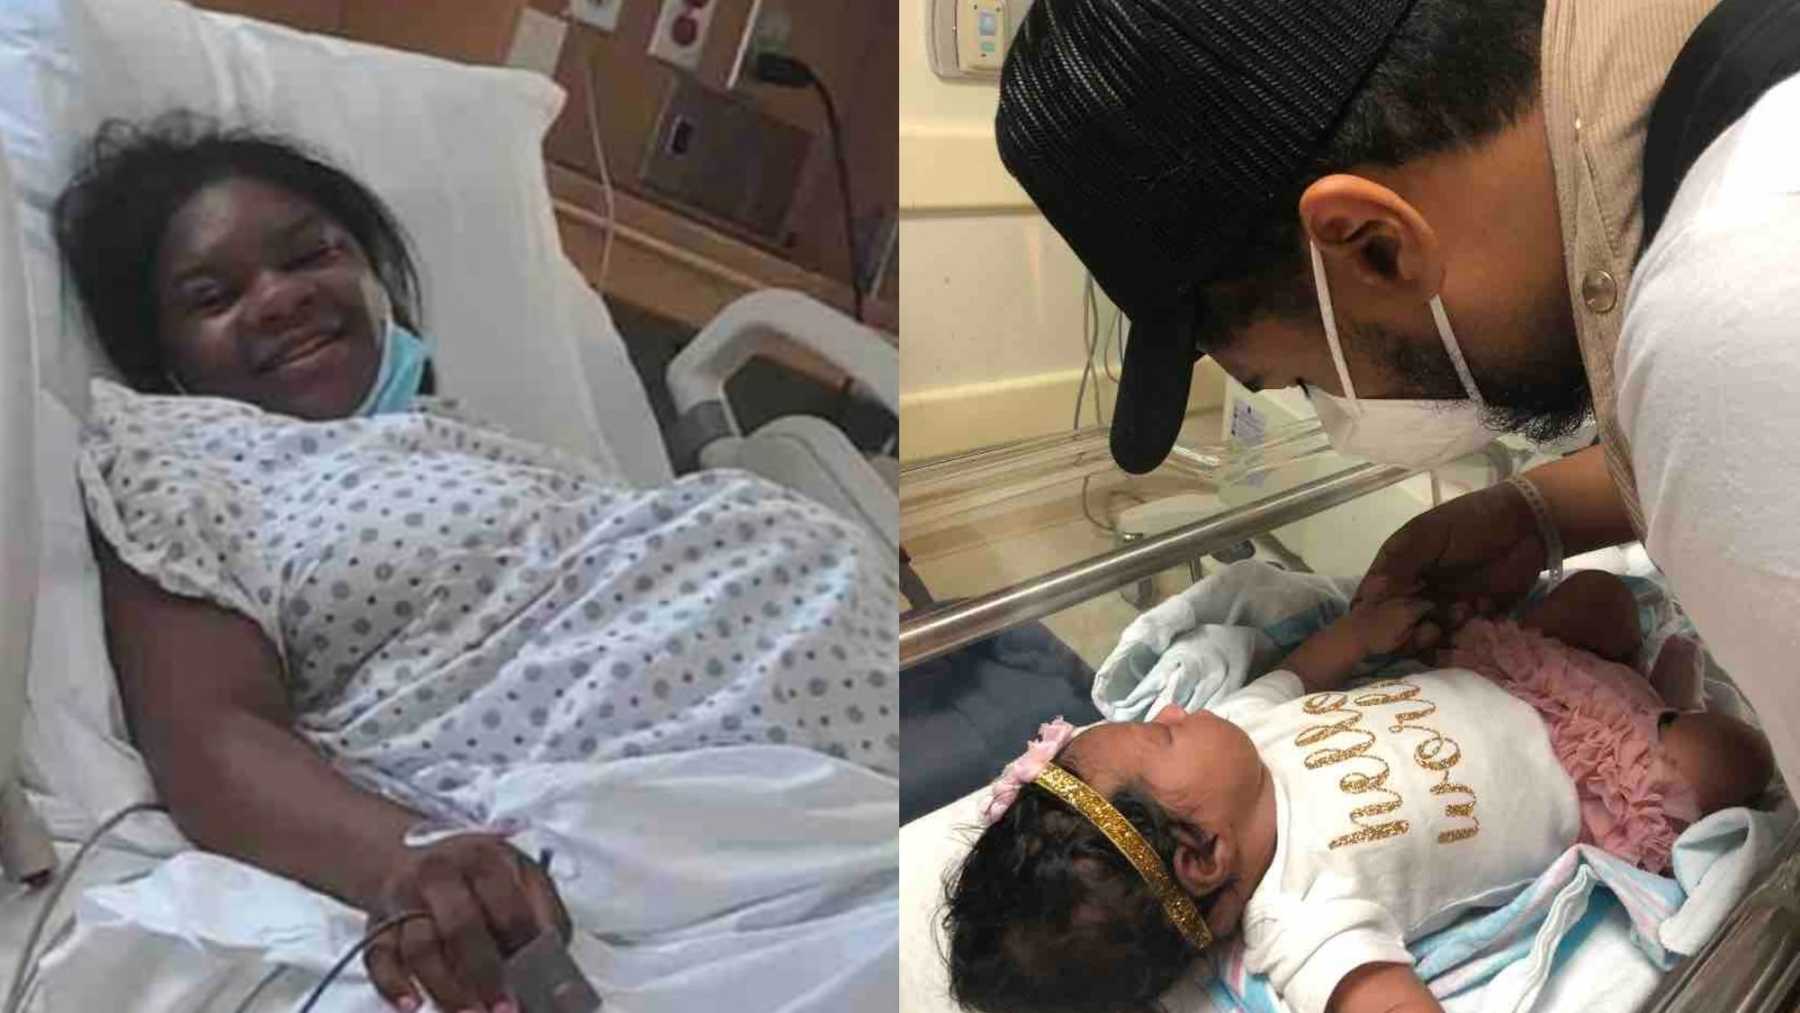 Yet Another Black Mom Dies During Childbirth in NYC | CafeMom.com